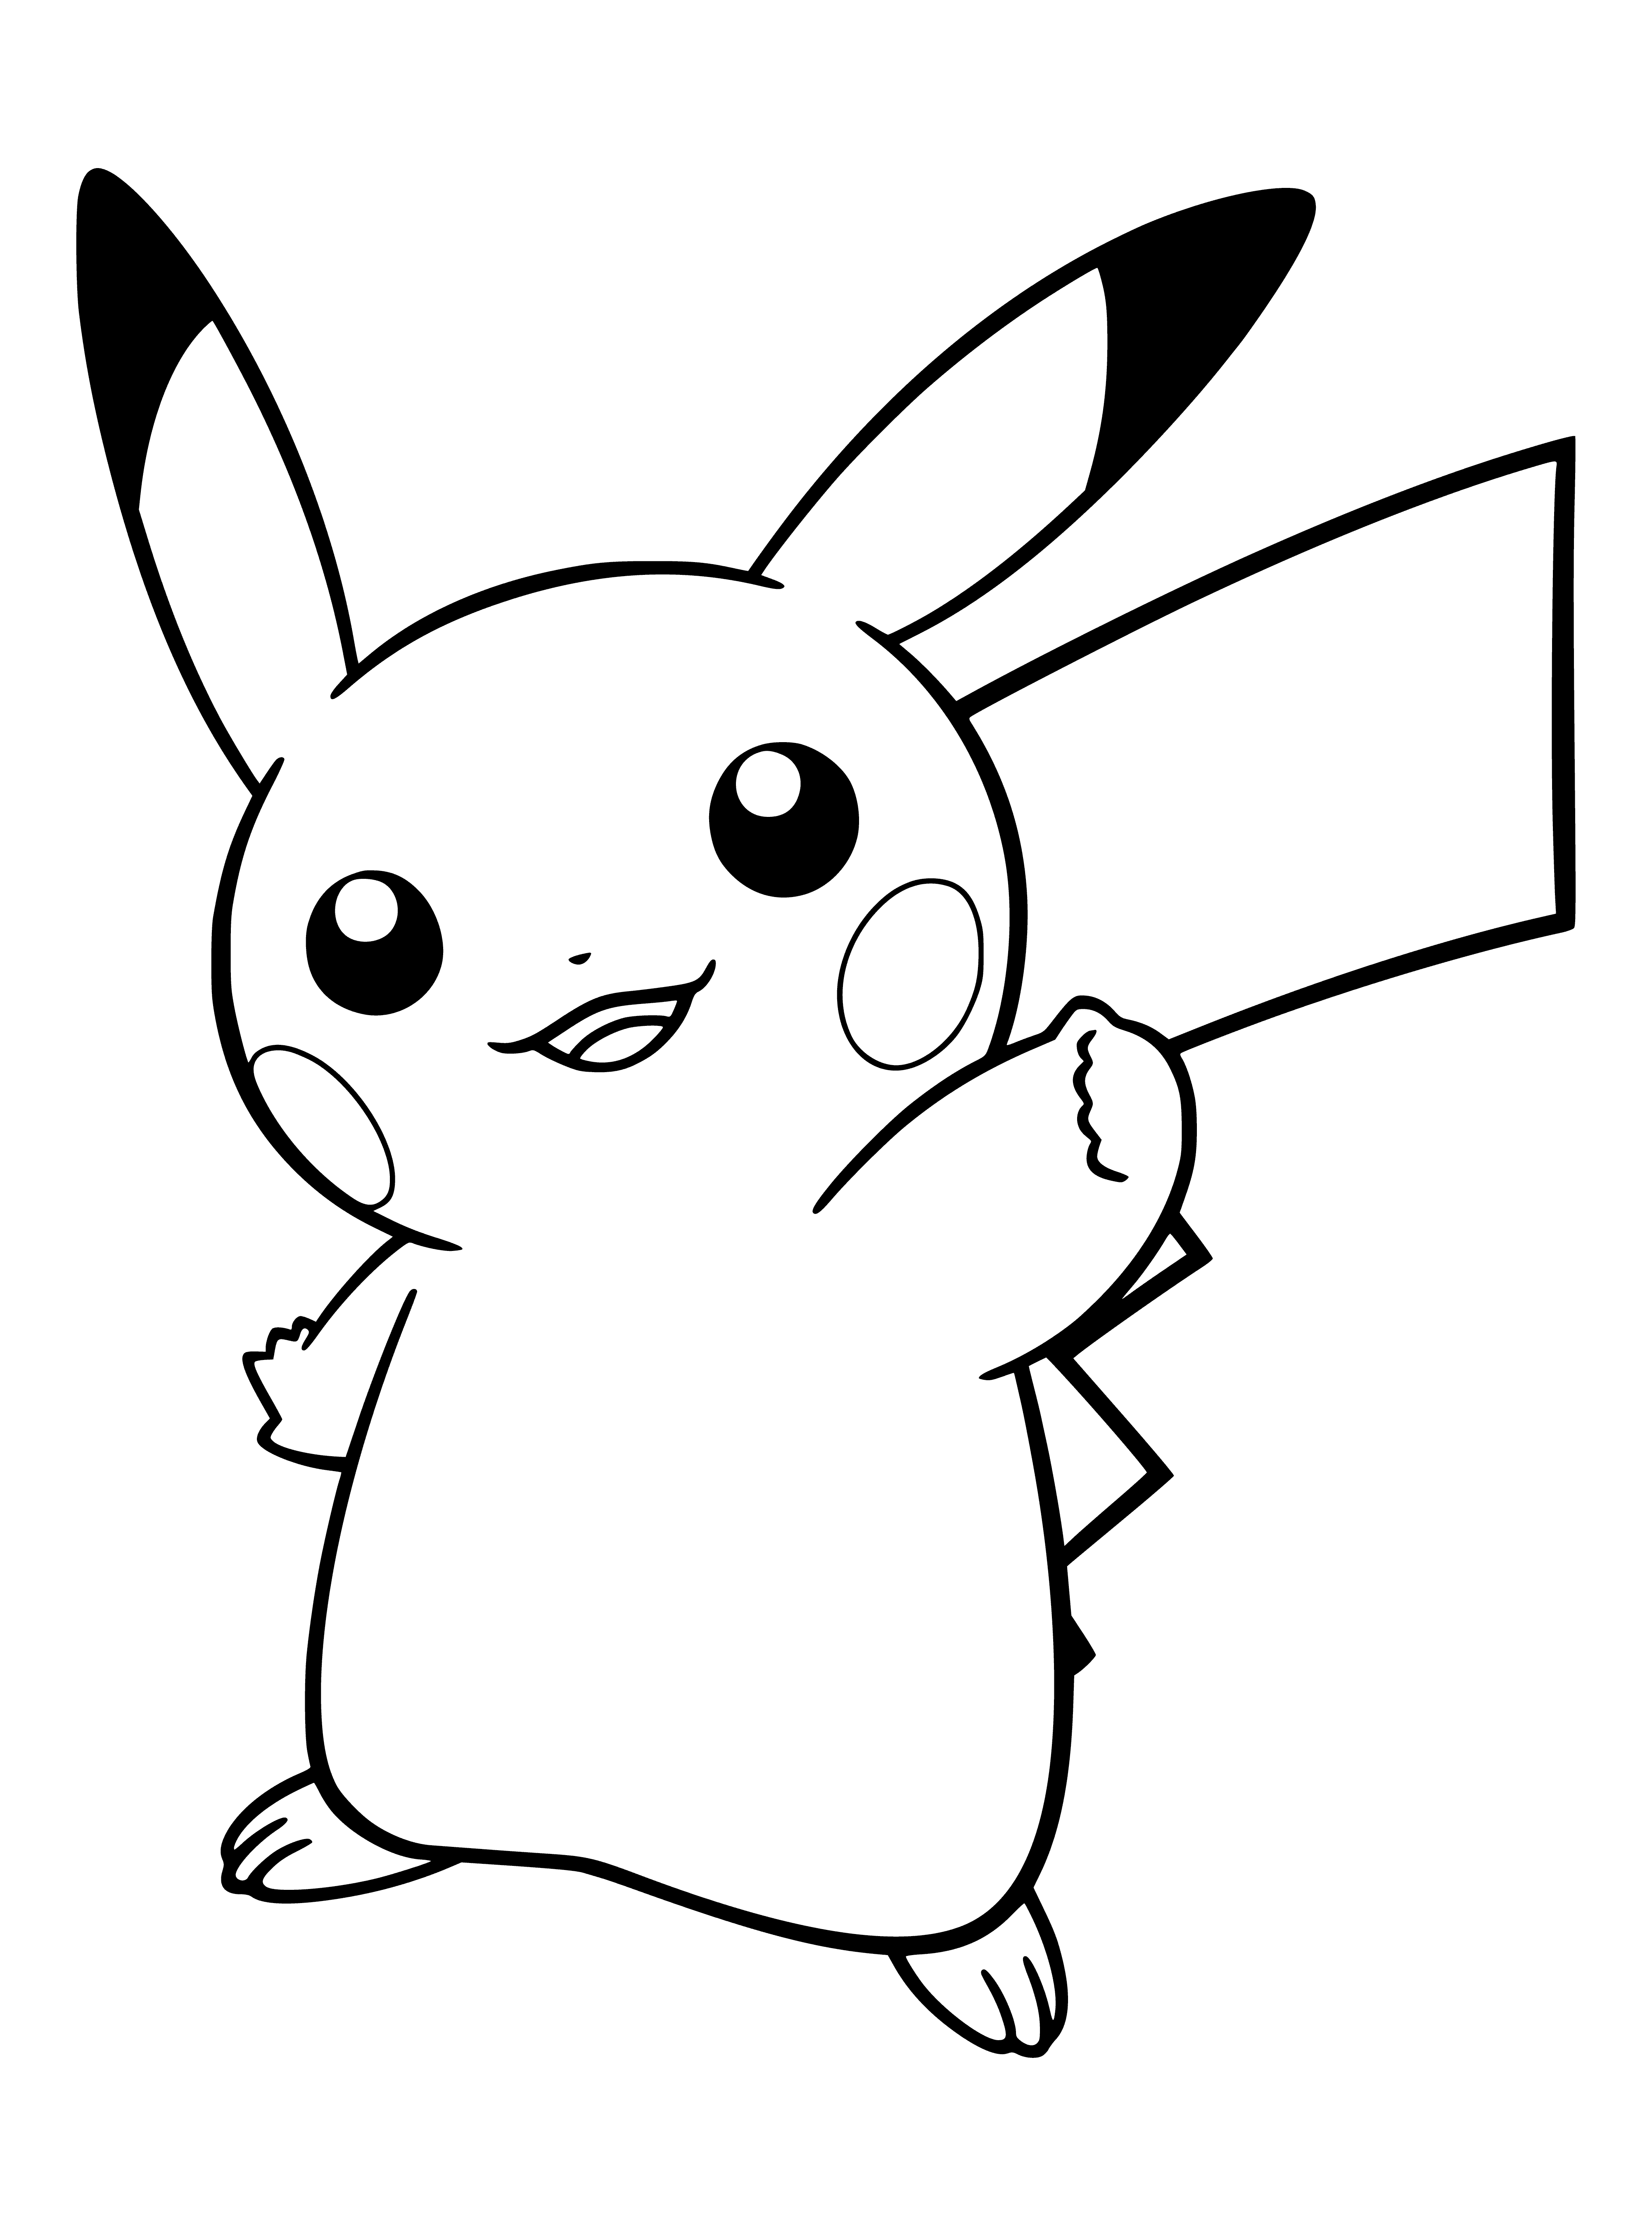 coloring page: Pikachu is the popular electric rodent Pokemon; yellow body, black stripes & red thunderbolt tail. Can even learn to speak human language.